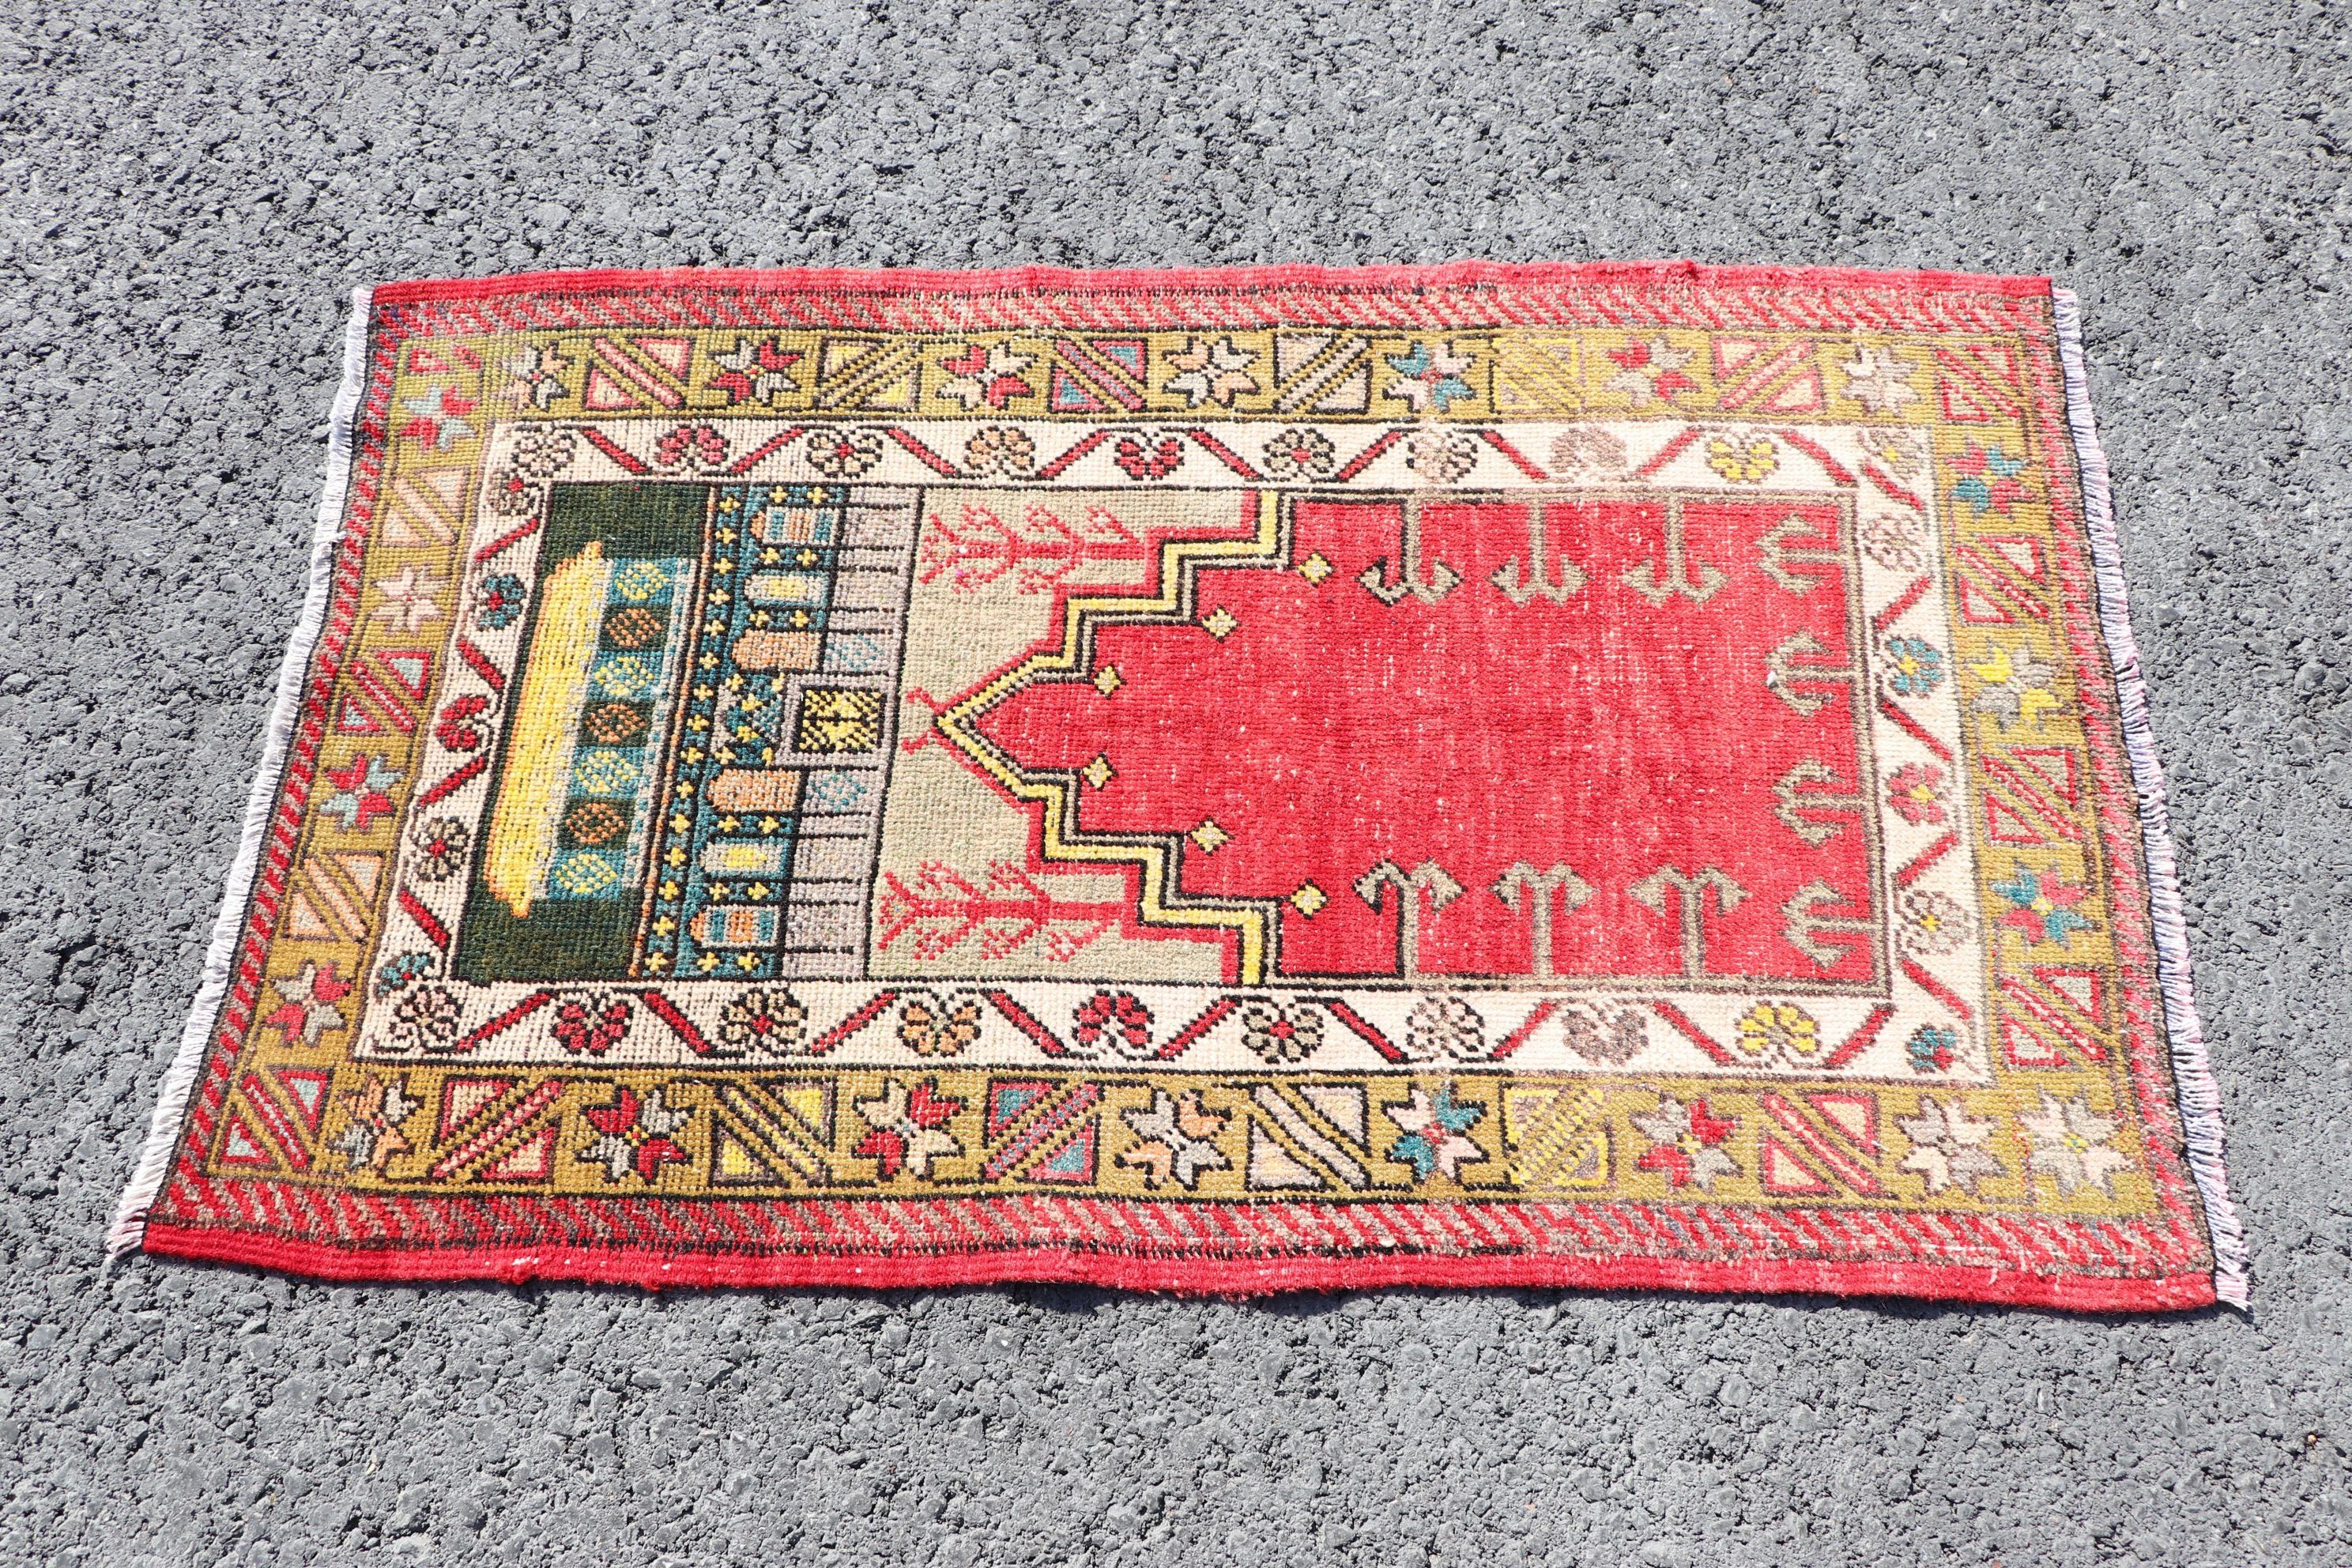 Red Oushak Rugs, Wool Rug, Tribal Rug, 2.3x3.8 ft Small Rug, Moroccan Rugs, Entry Rug, Rugs for Entry, Turkish Rugs, Bath Rug, Vintage Rug